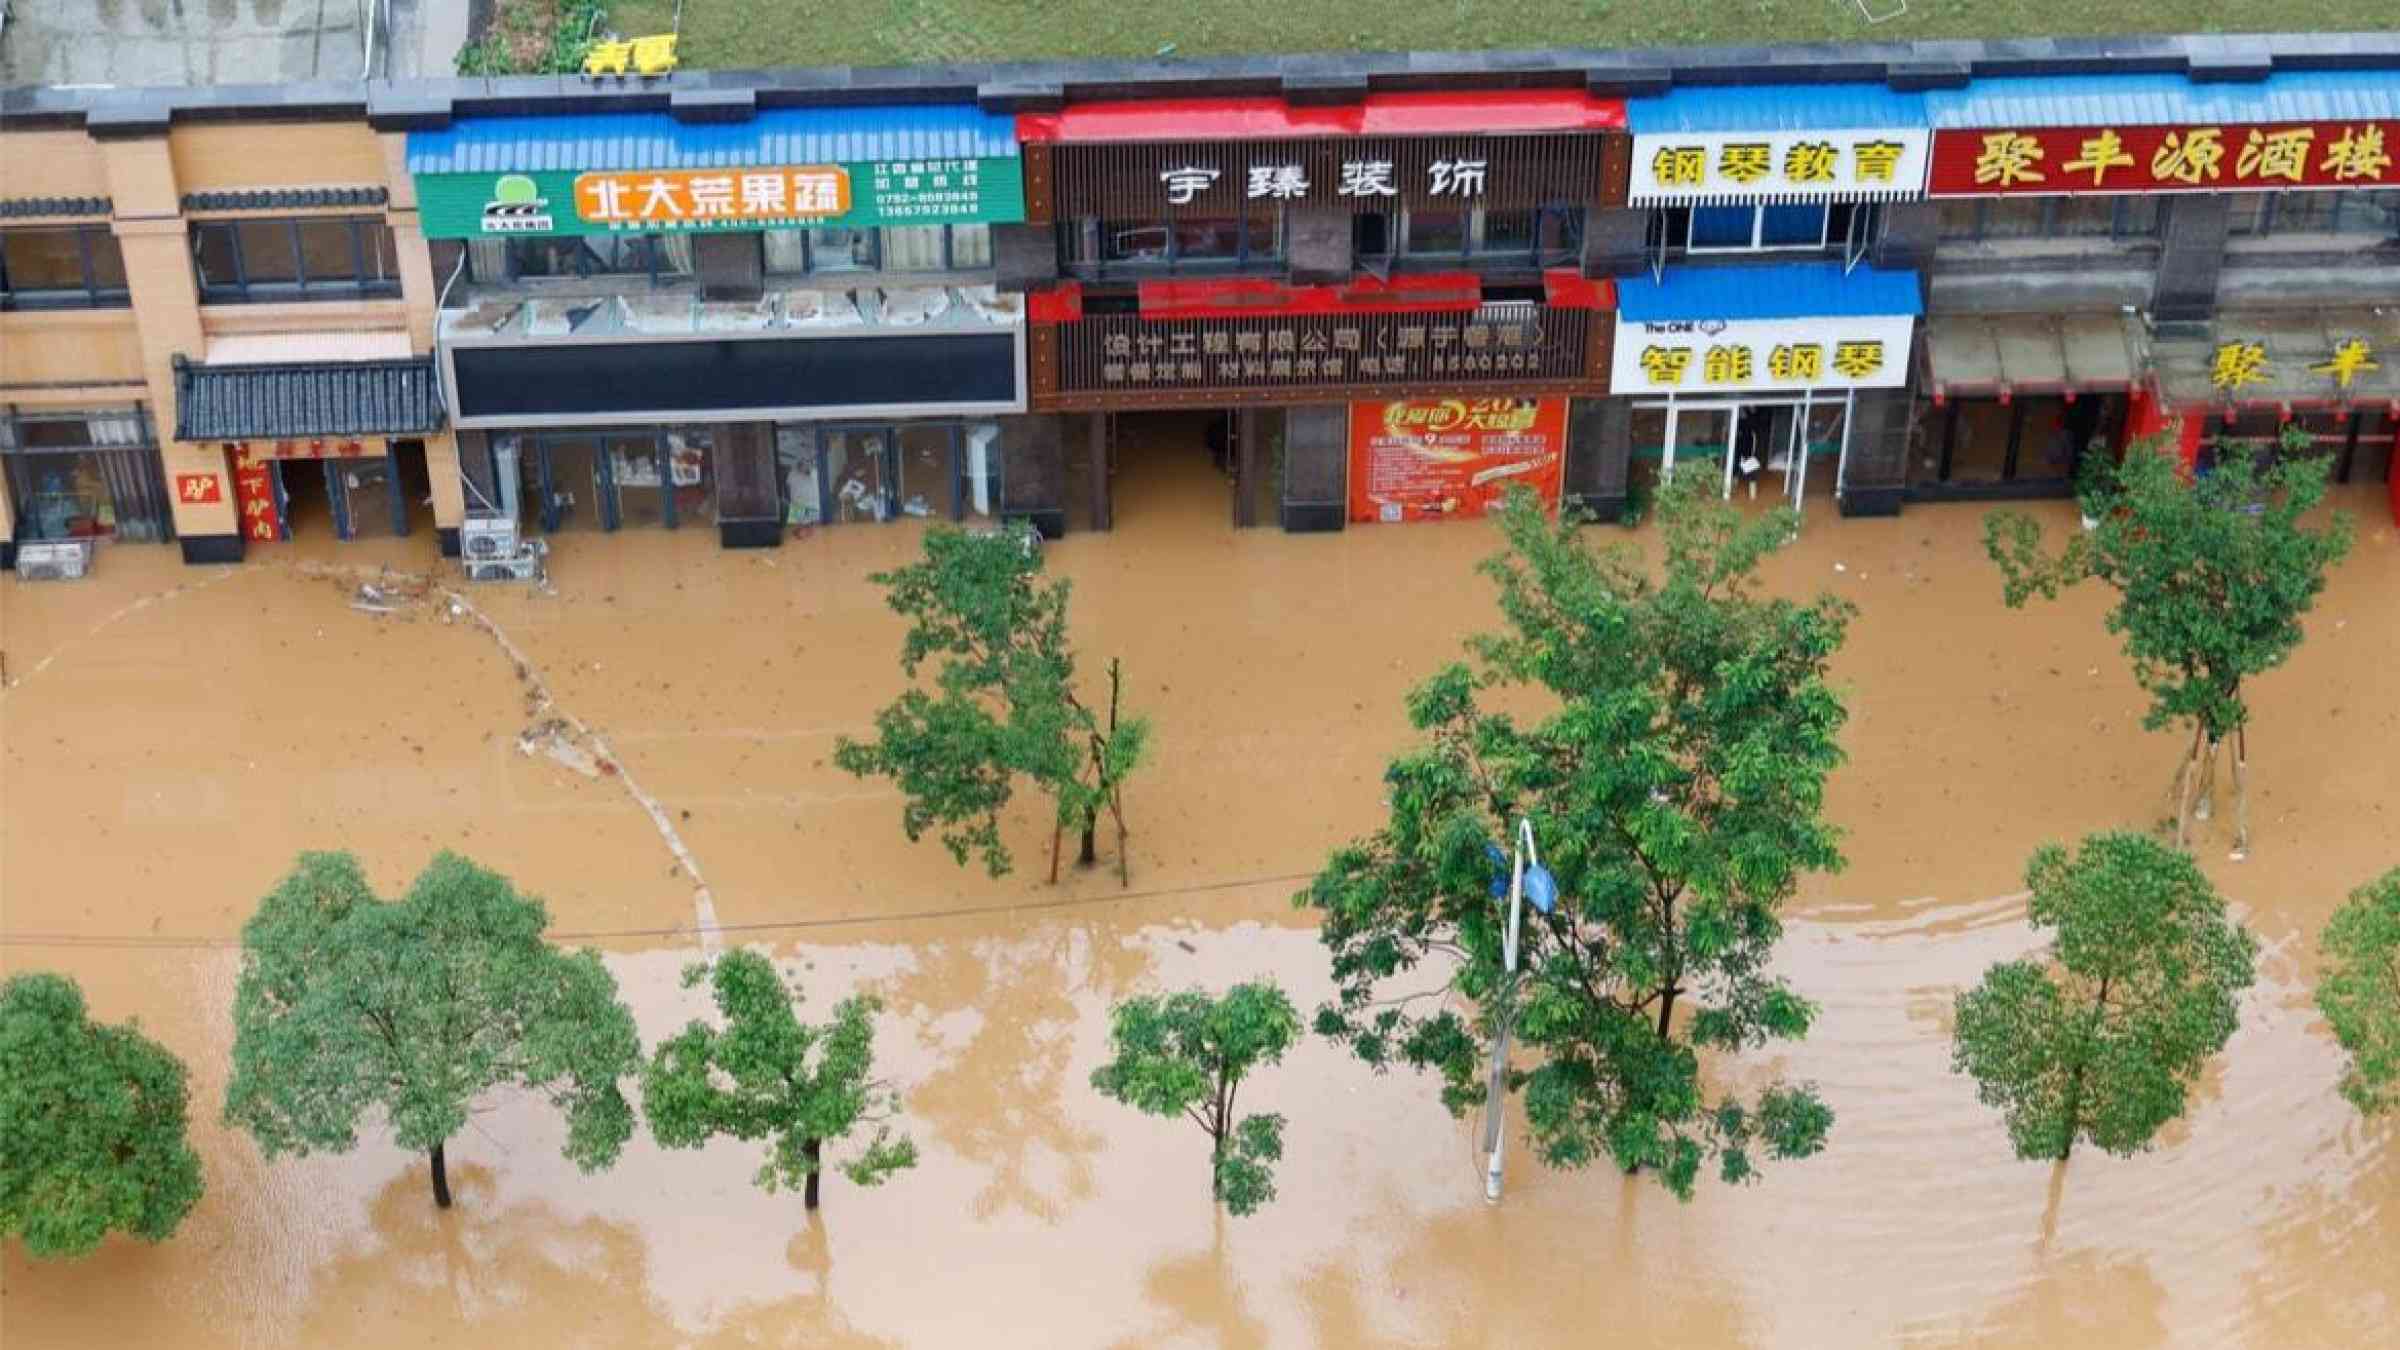 Flooded stores in Jianxi, China